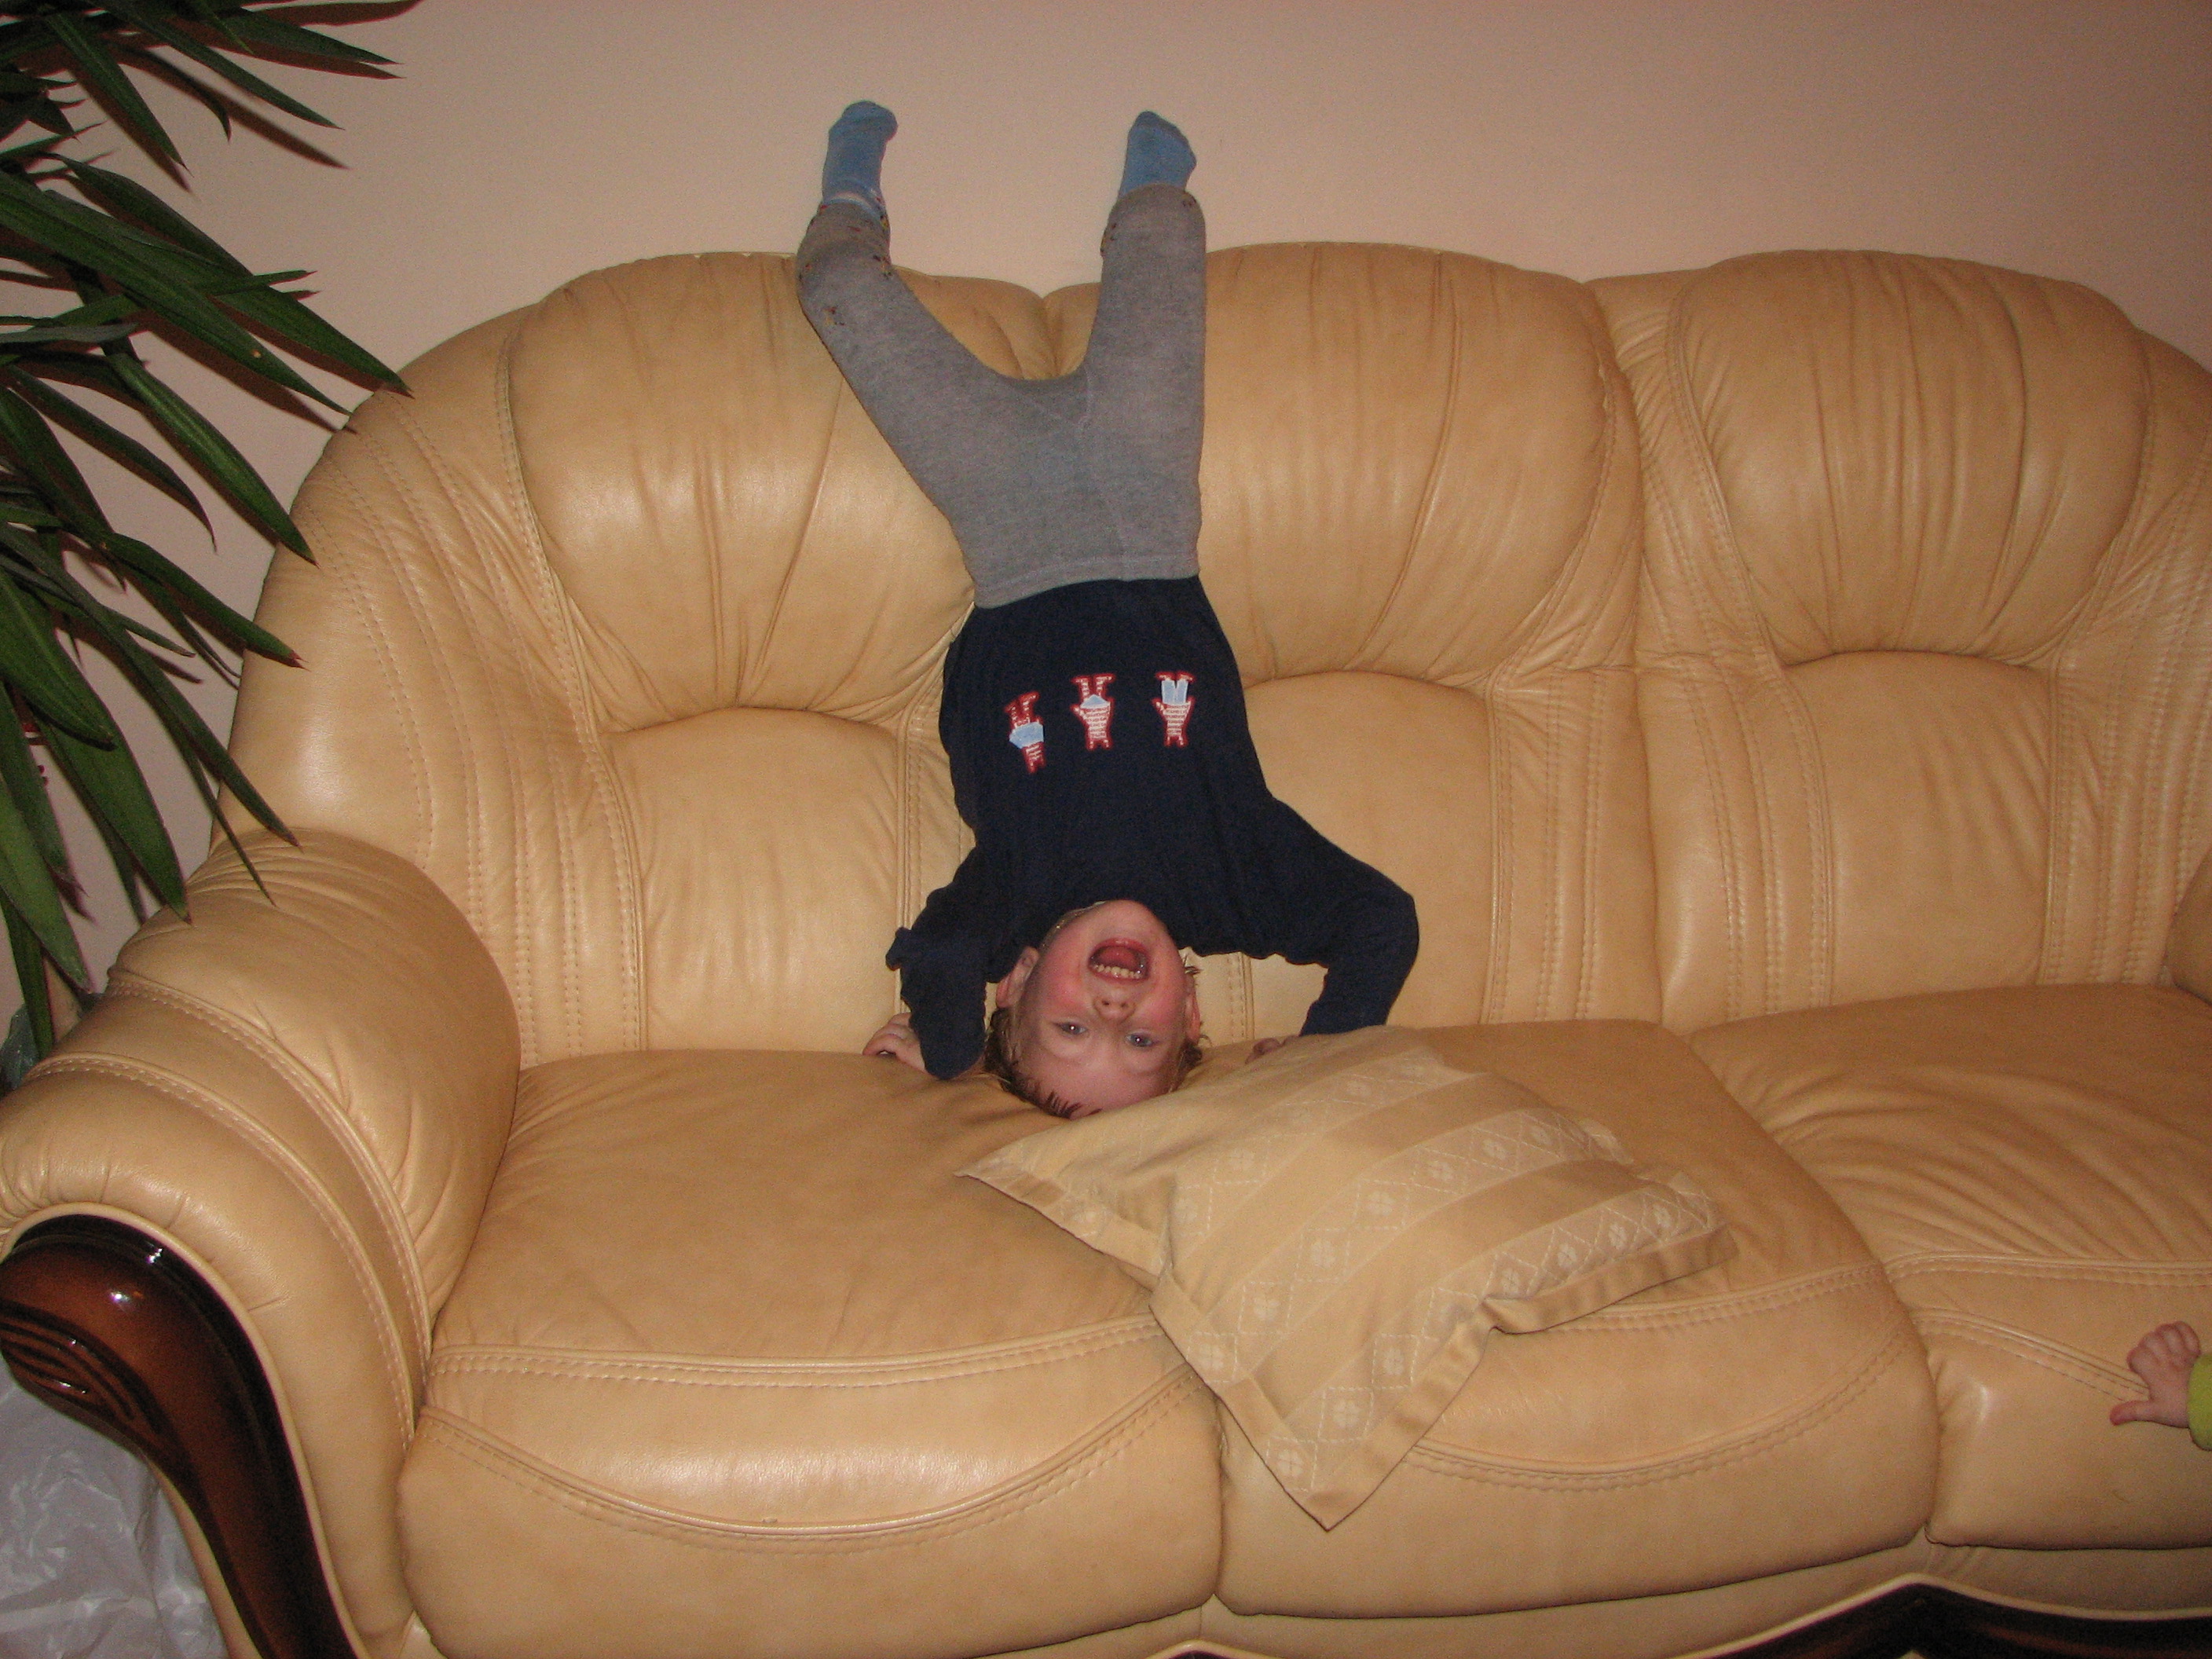 A small boy standing on his head on a leather sofa